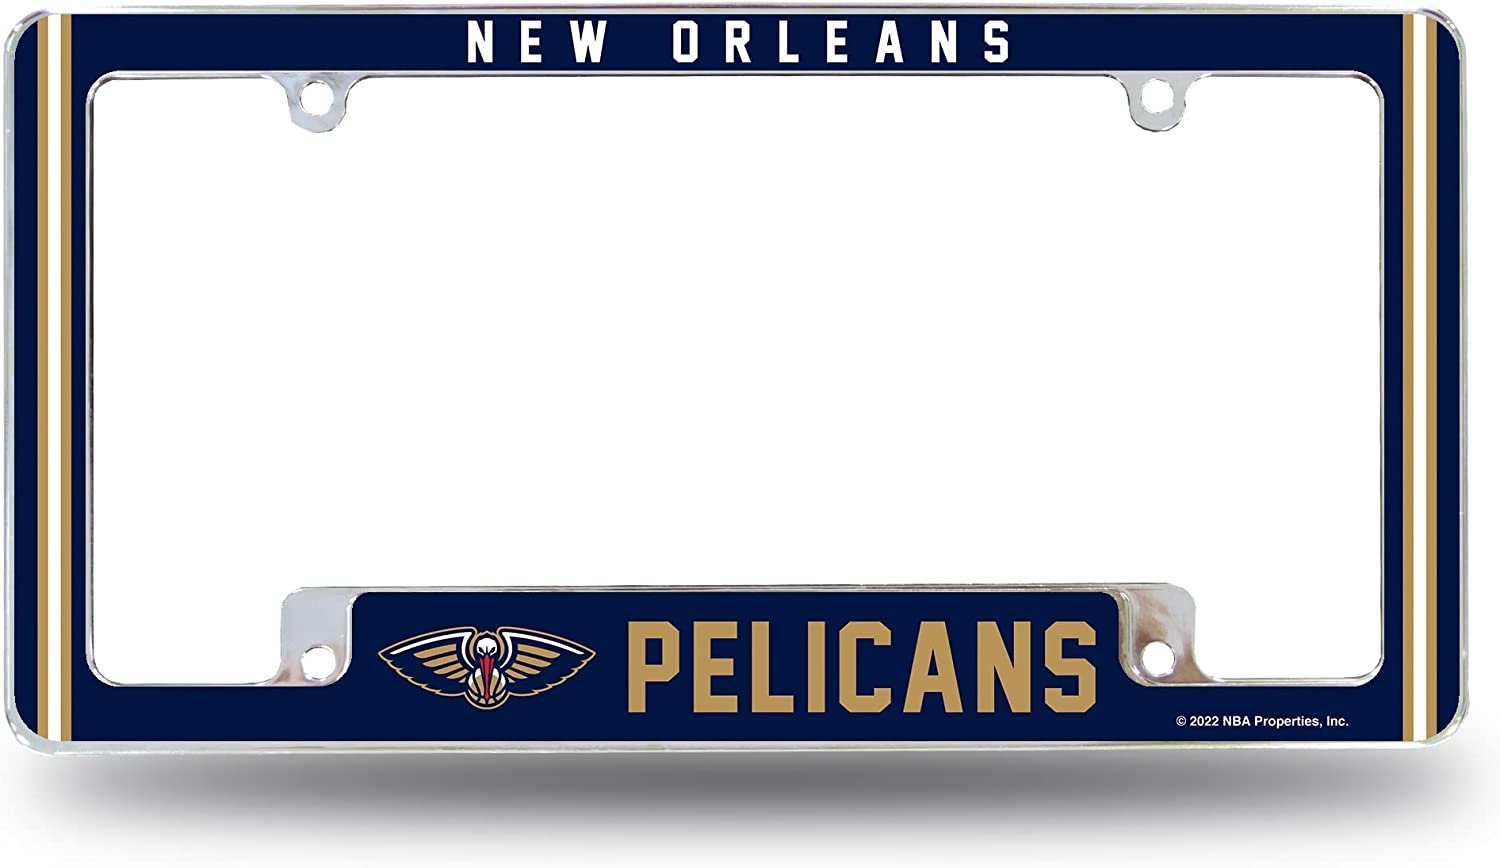 New Orleans Pelicans Metal License Plate Frame Chrome Tag Cover Alternate Design 6x12 Inch